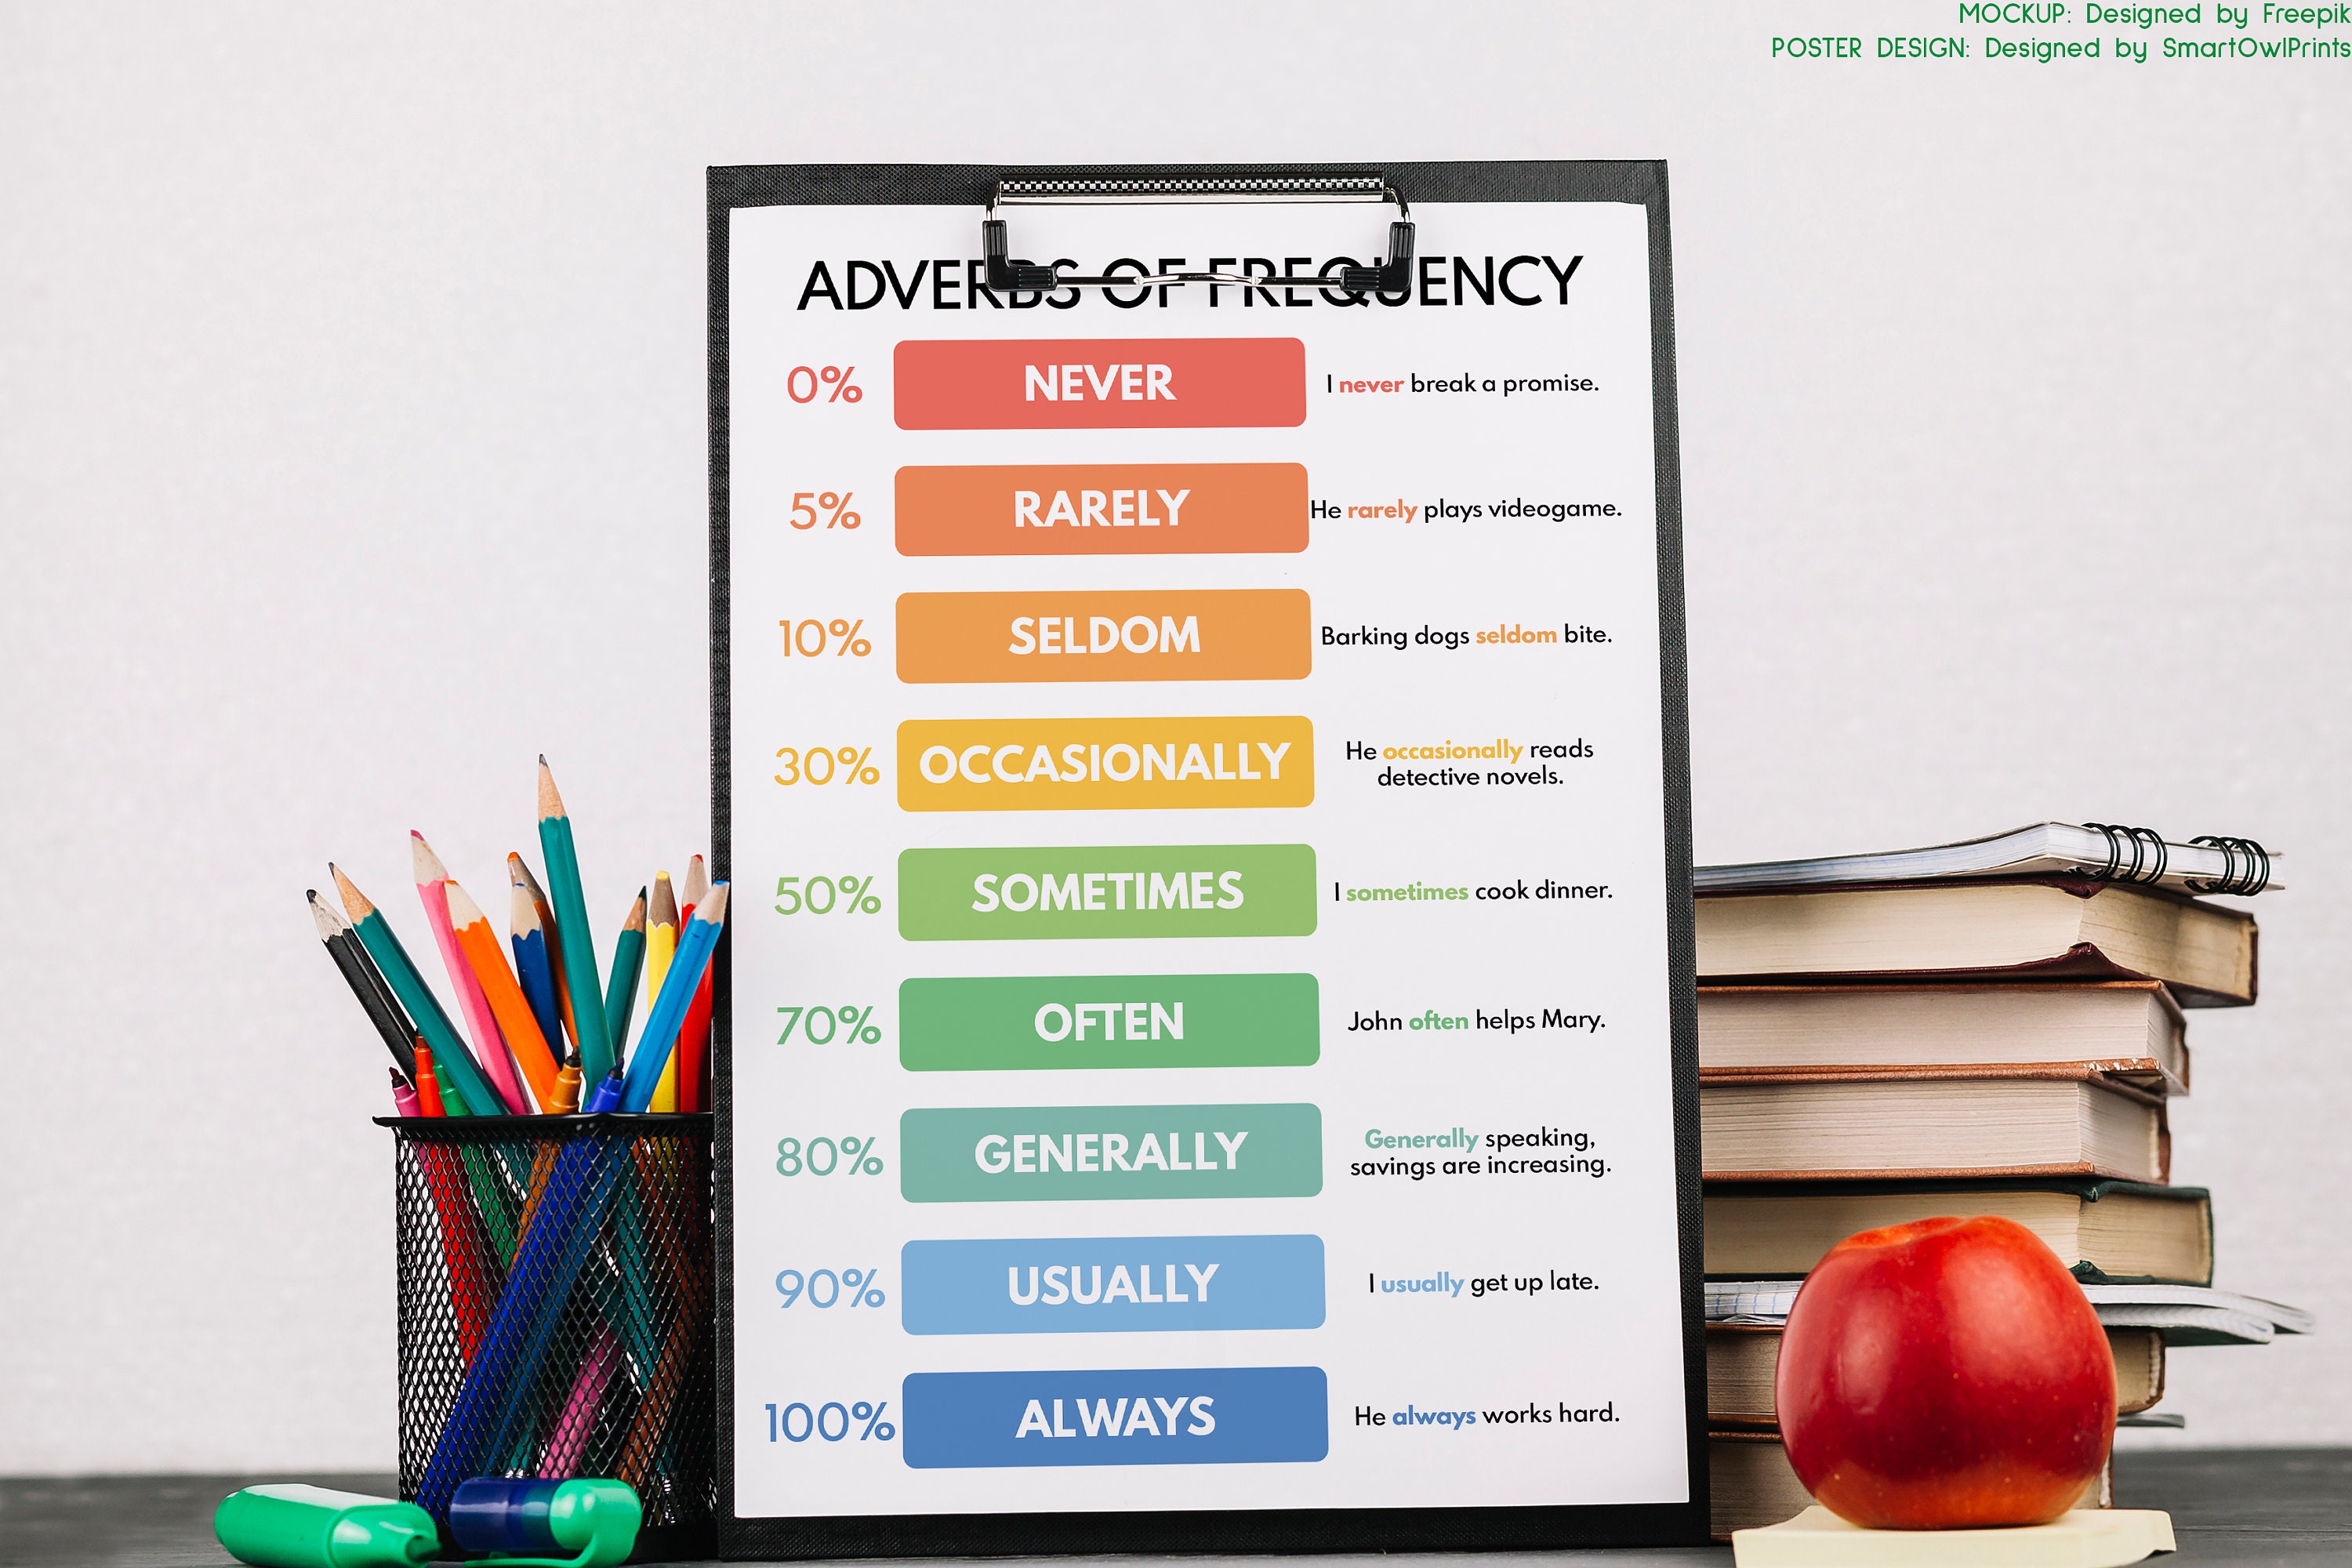 lingholic.com on X: A useful chart showing adverbs of frequency